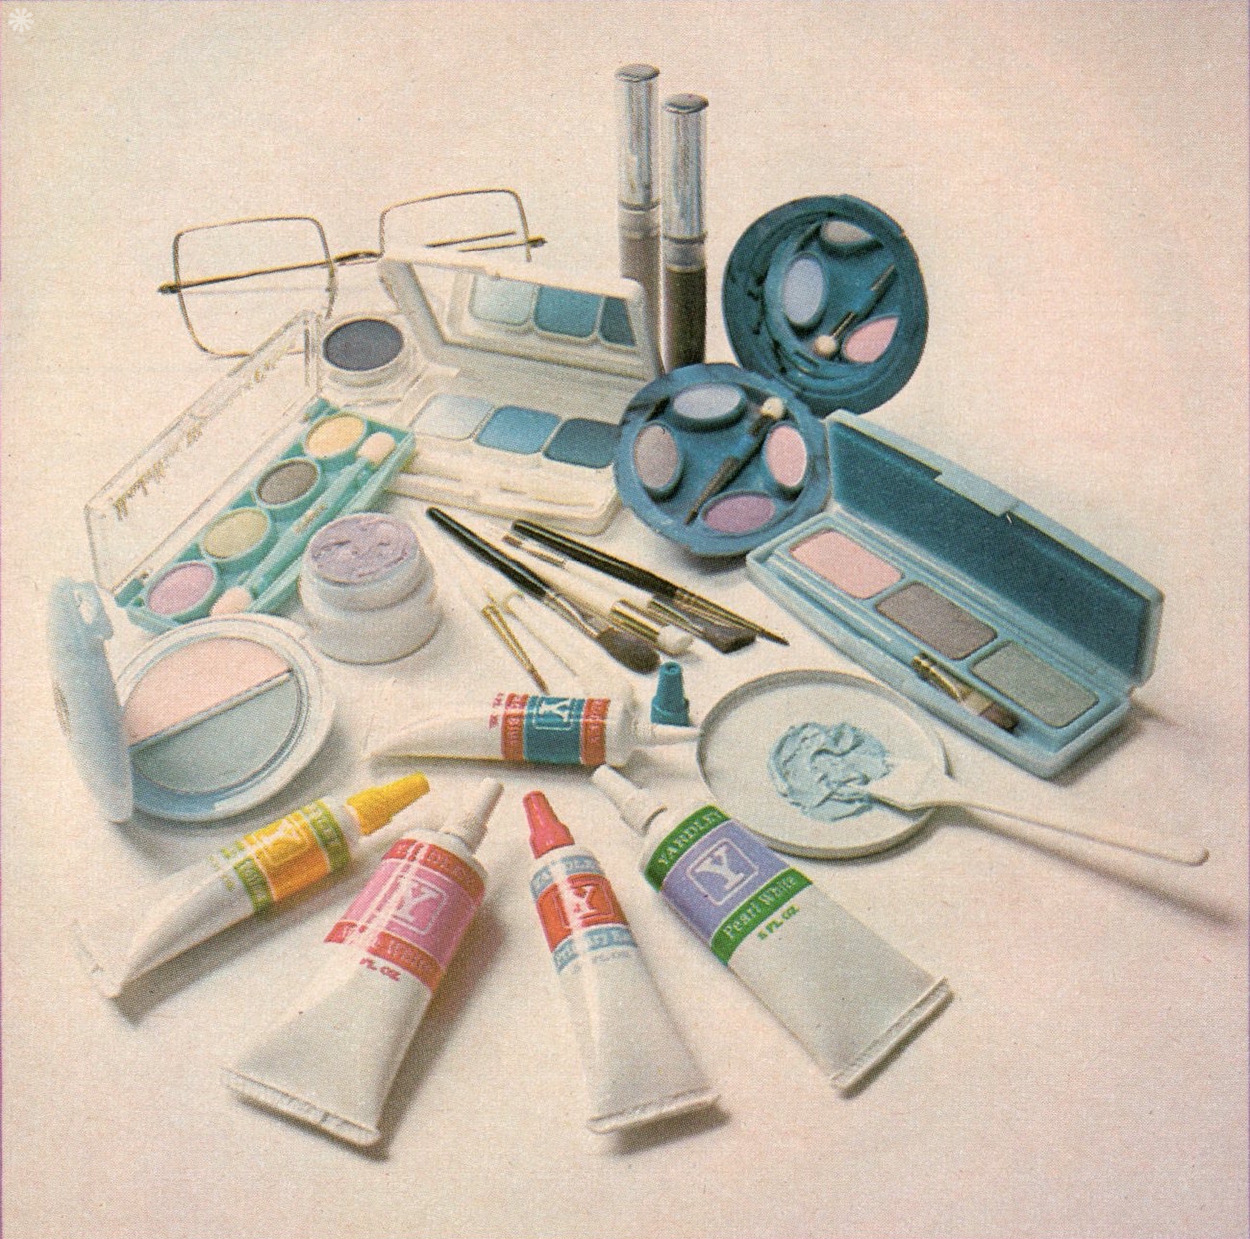 70′s Makeup, including products from Yardley,... The Groovy Archives